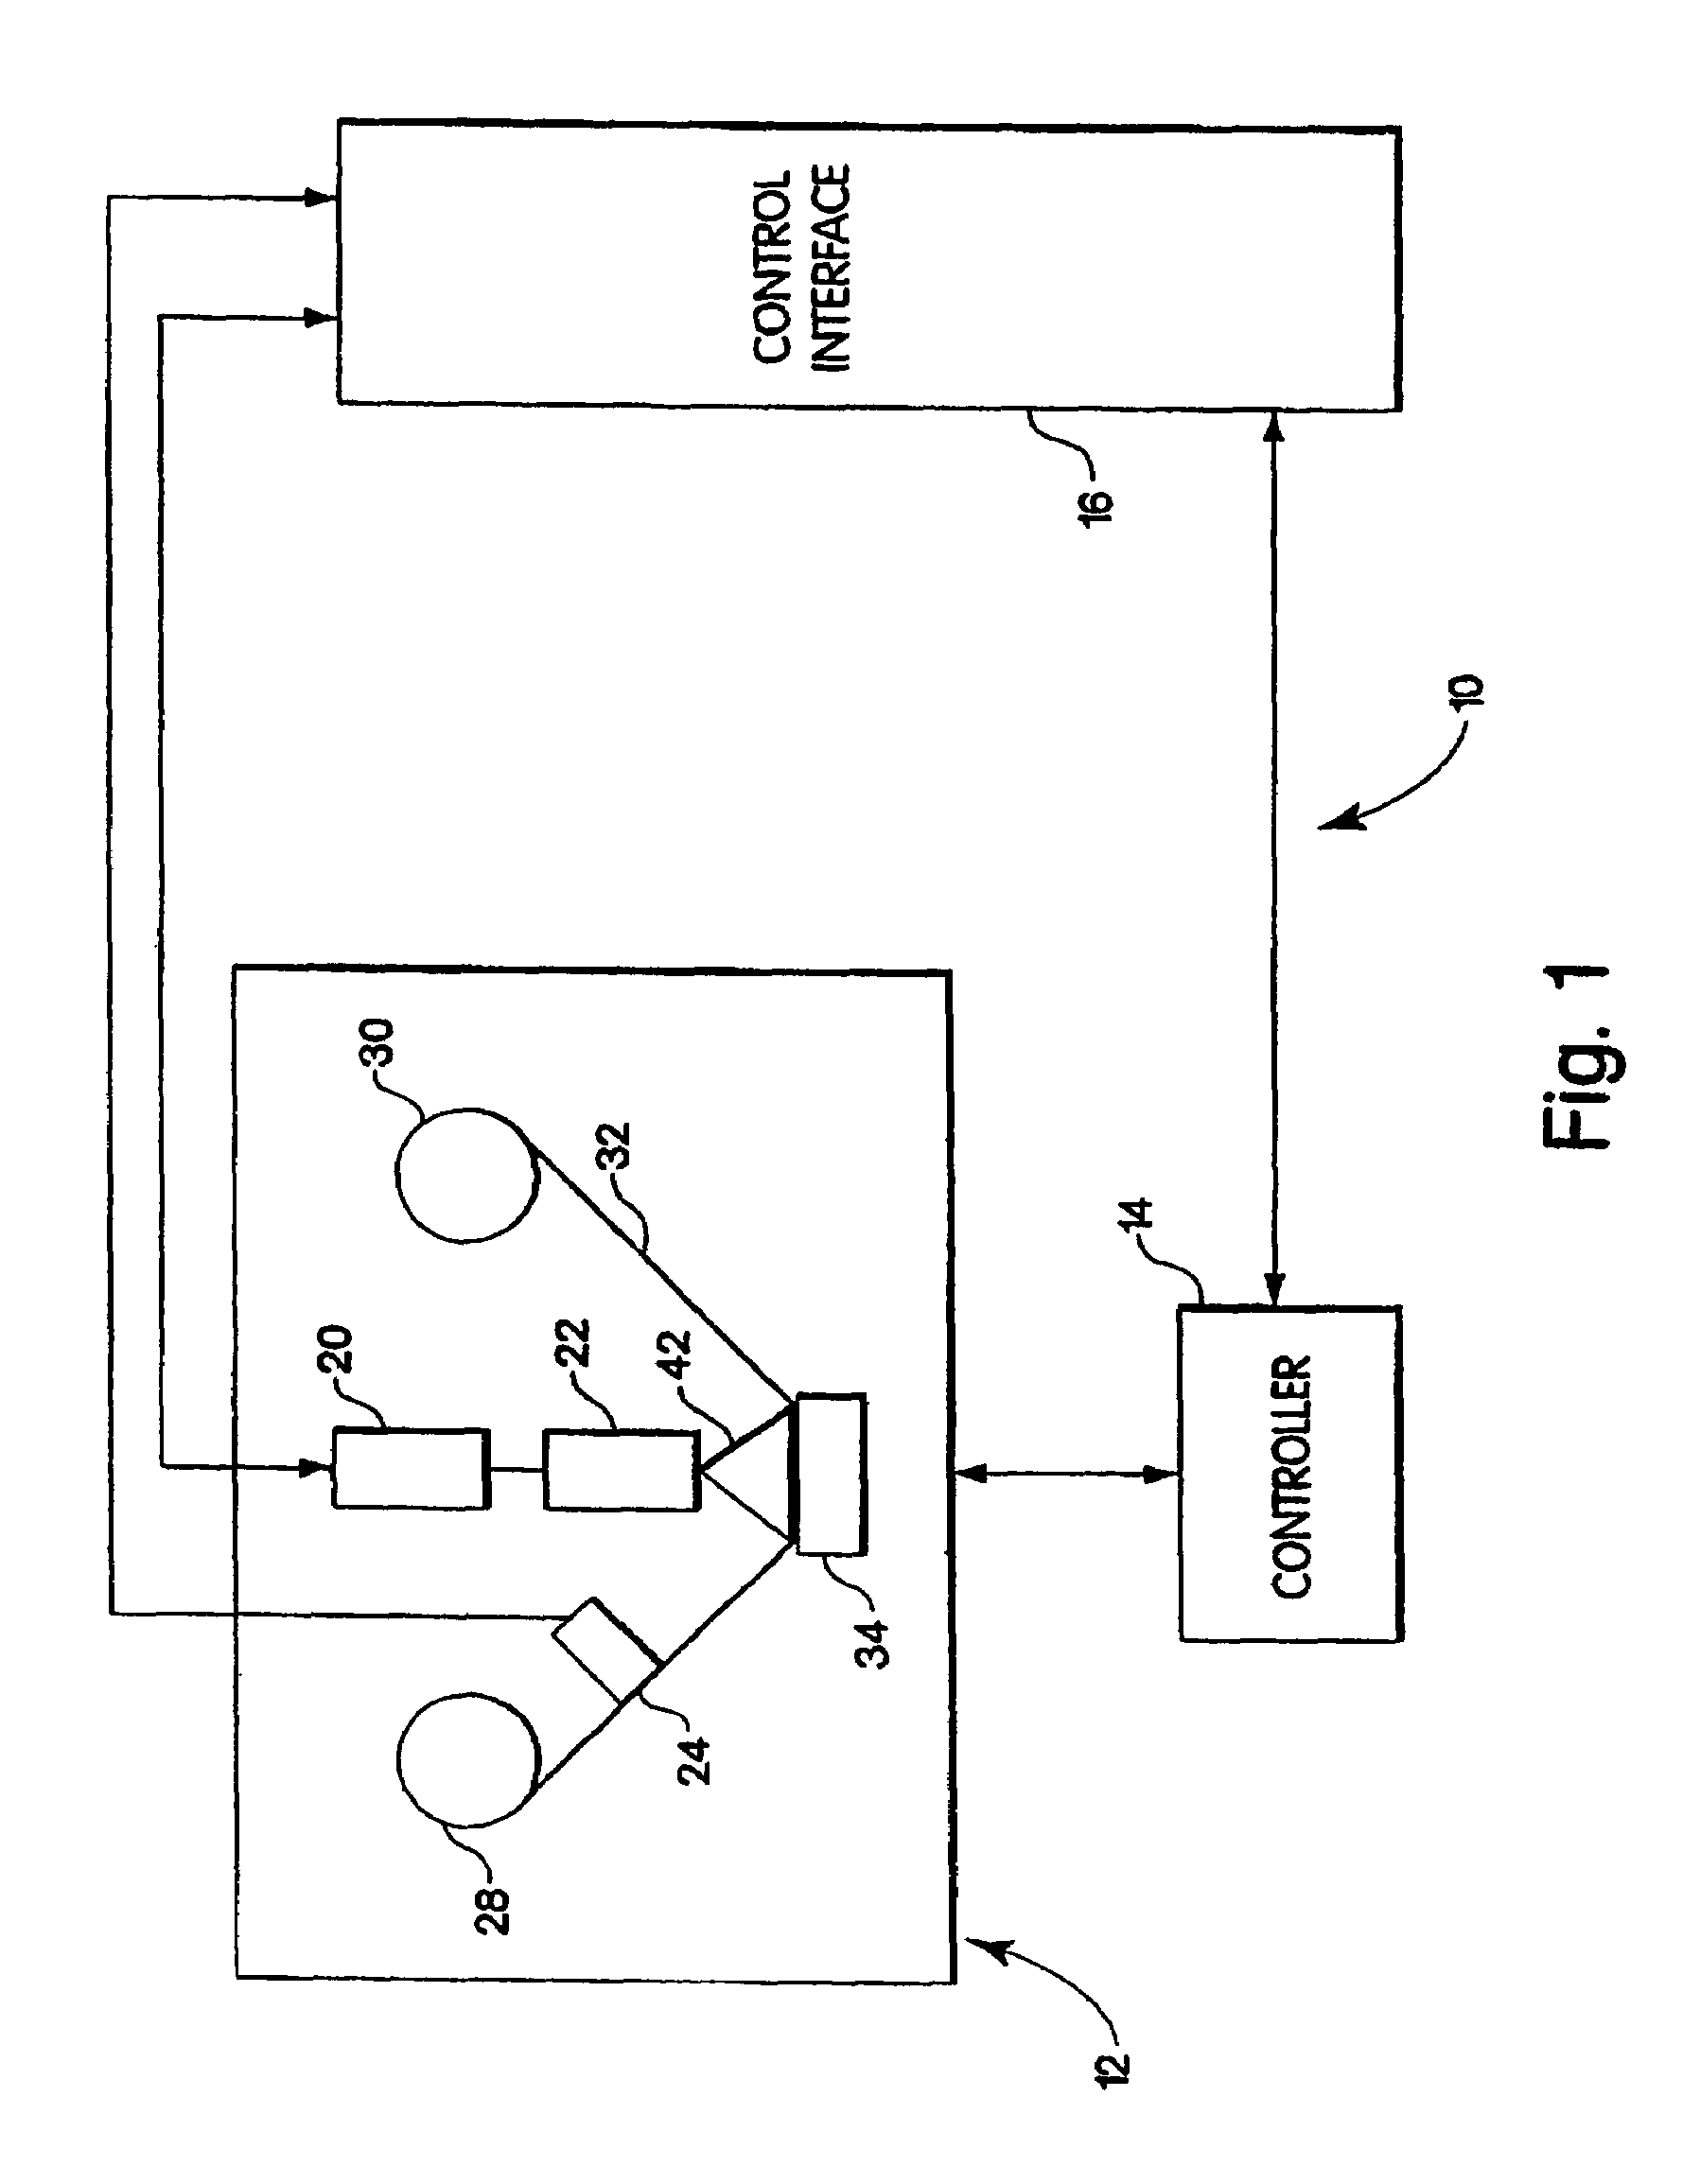 Systems and method for forming a servo pattern on a magnetic tape